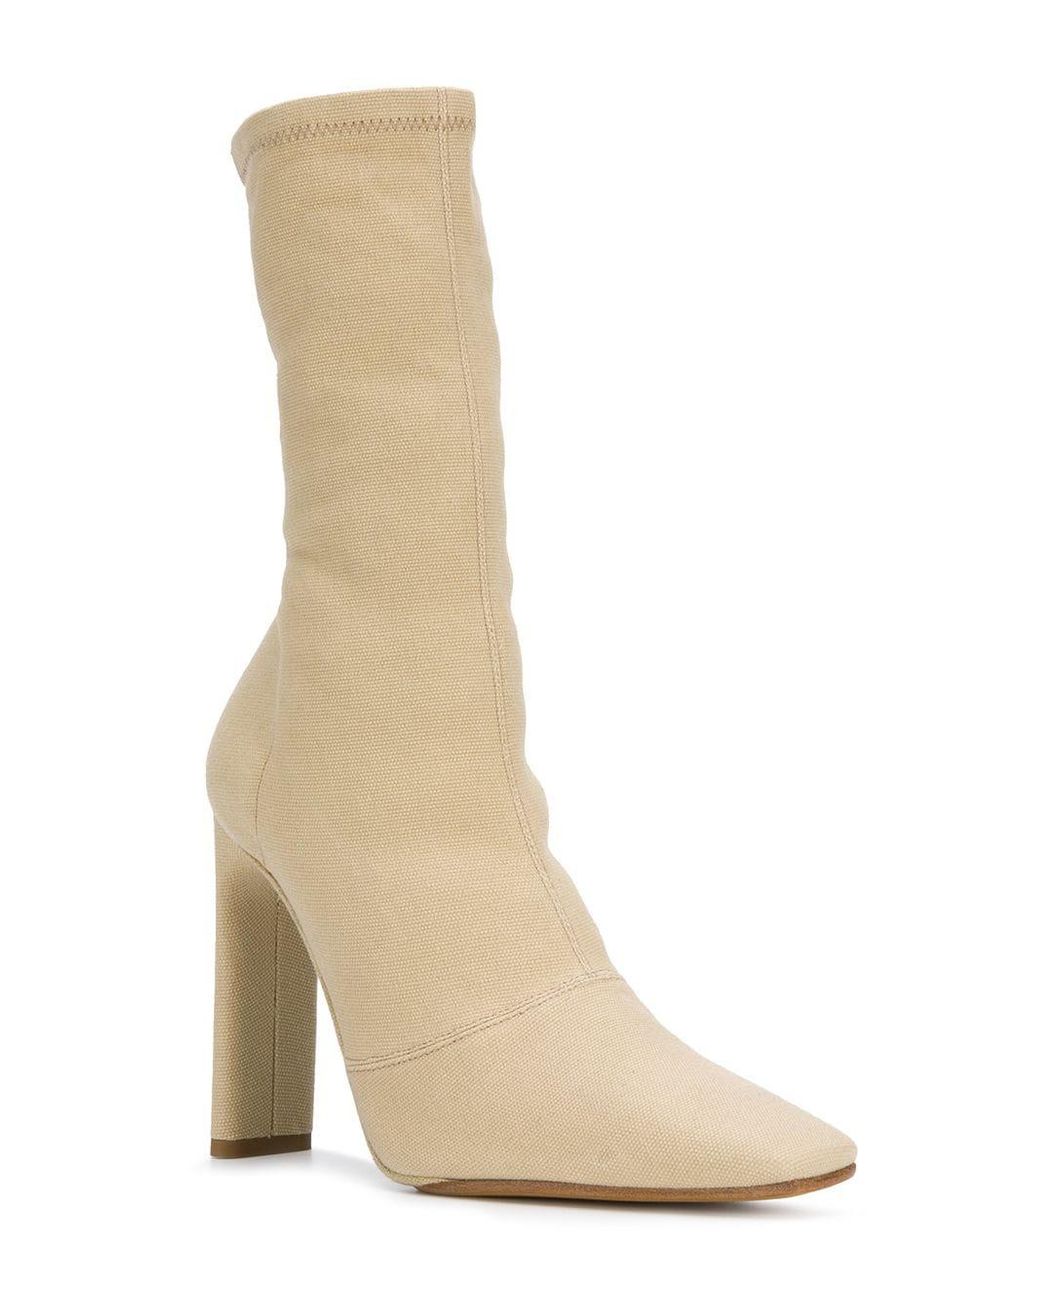 Yeezy Sock Boots in Natural | Lyst